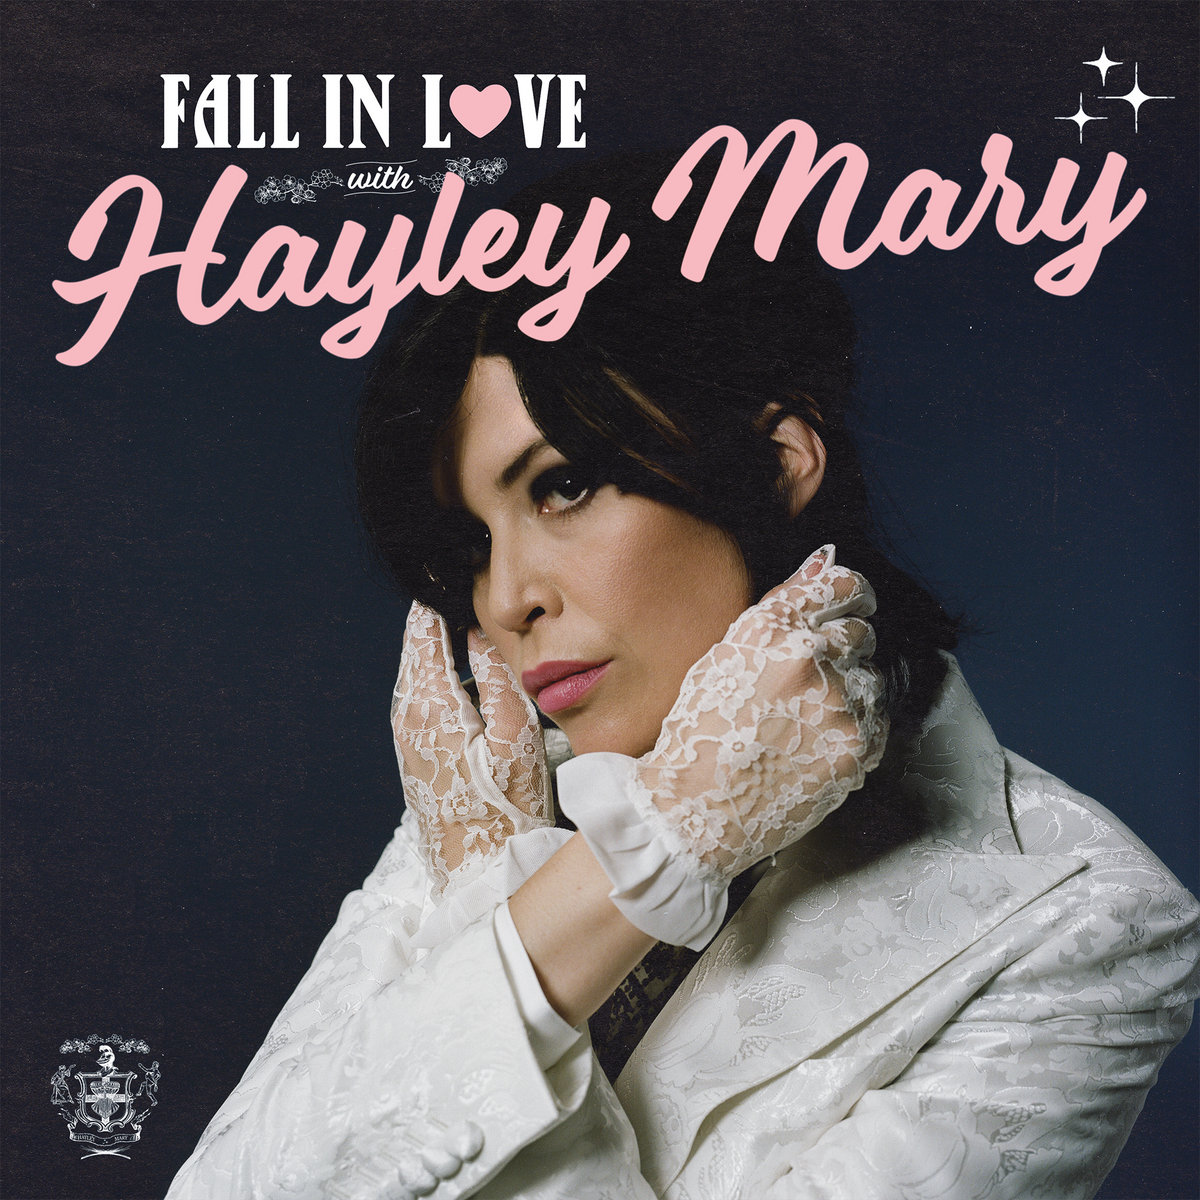 Hayley Mary Fall In Love EP cover artwork